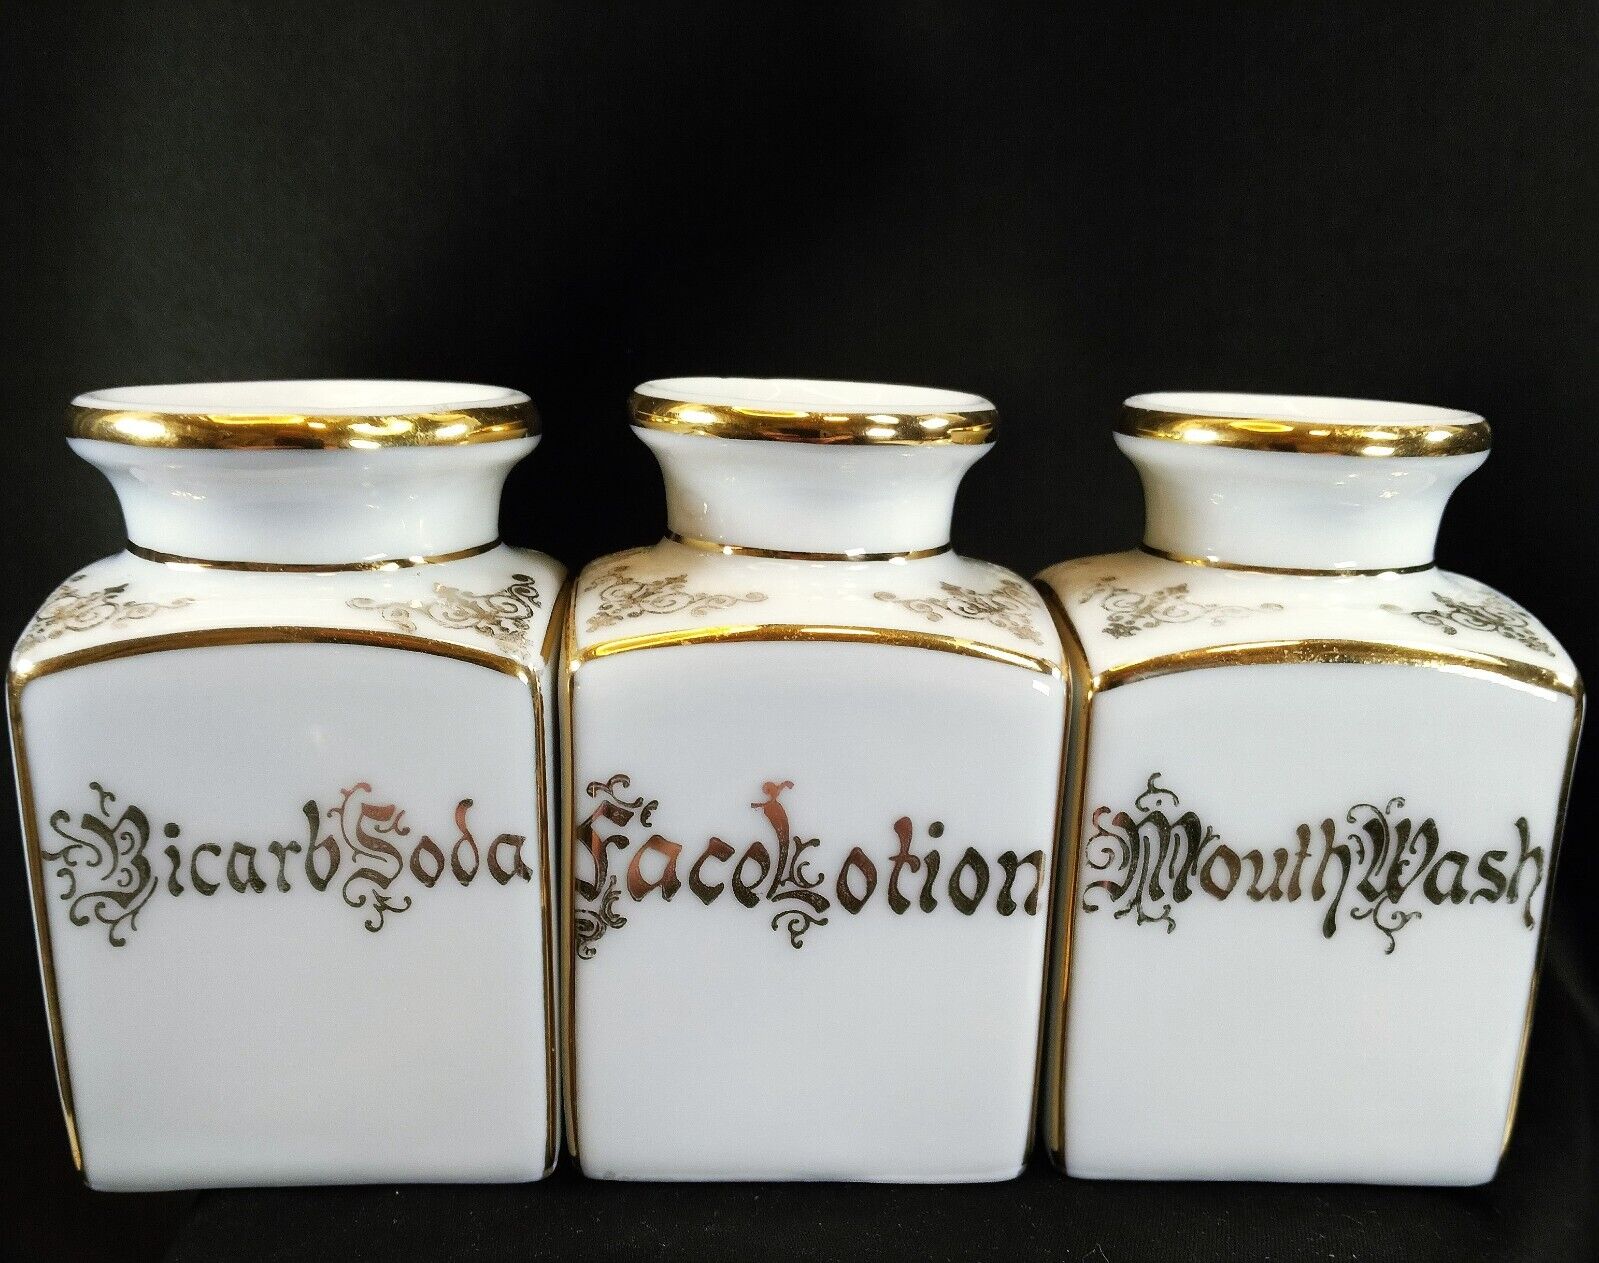 Antique Vanity Apothecary Jars Delicate Florals with Calligraphy Gold Trim